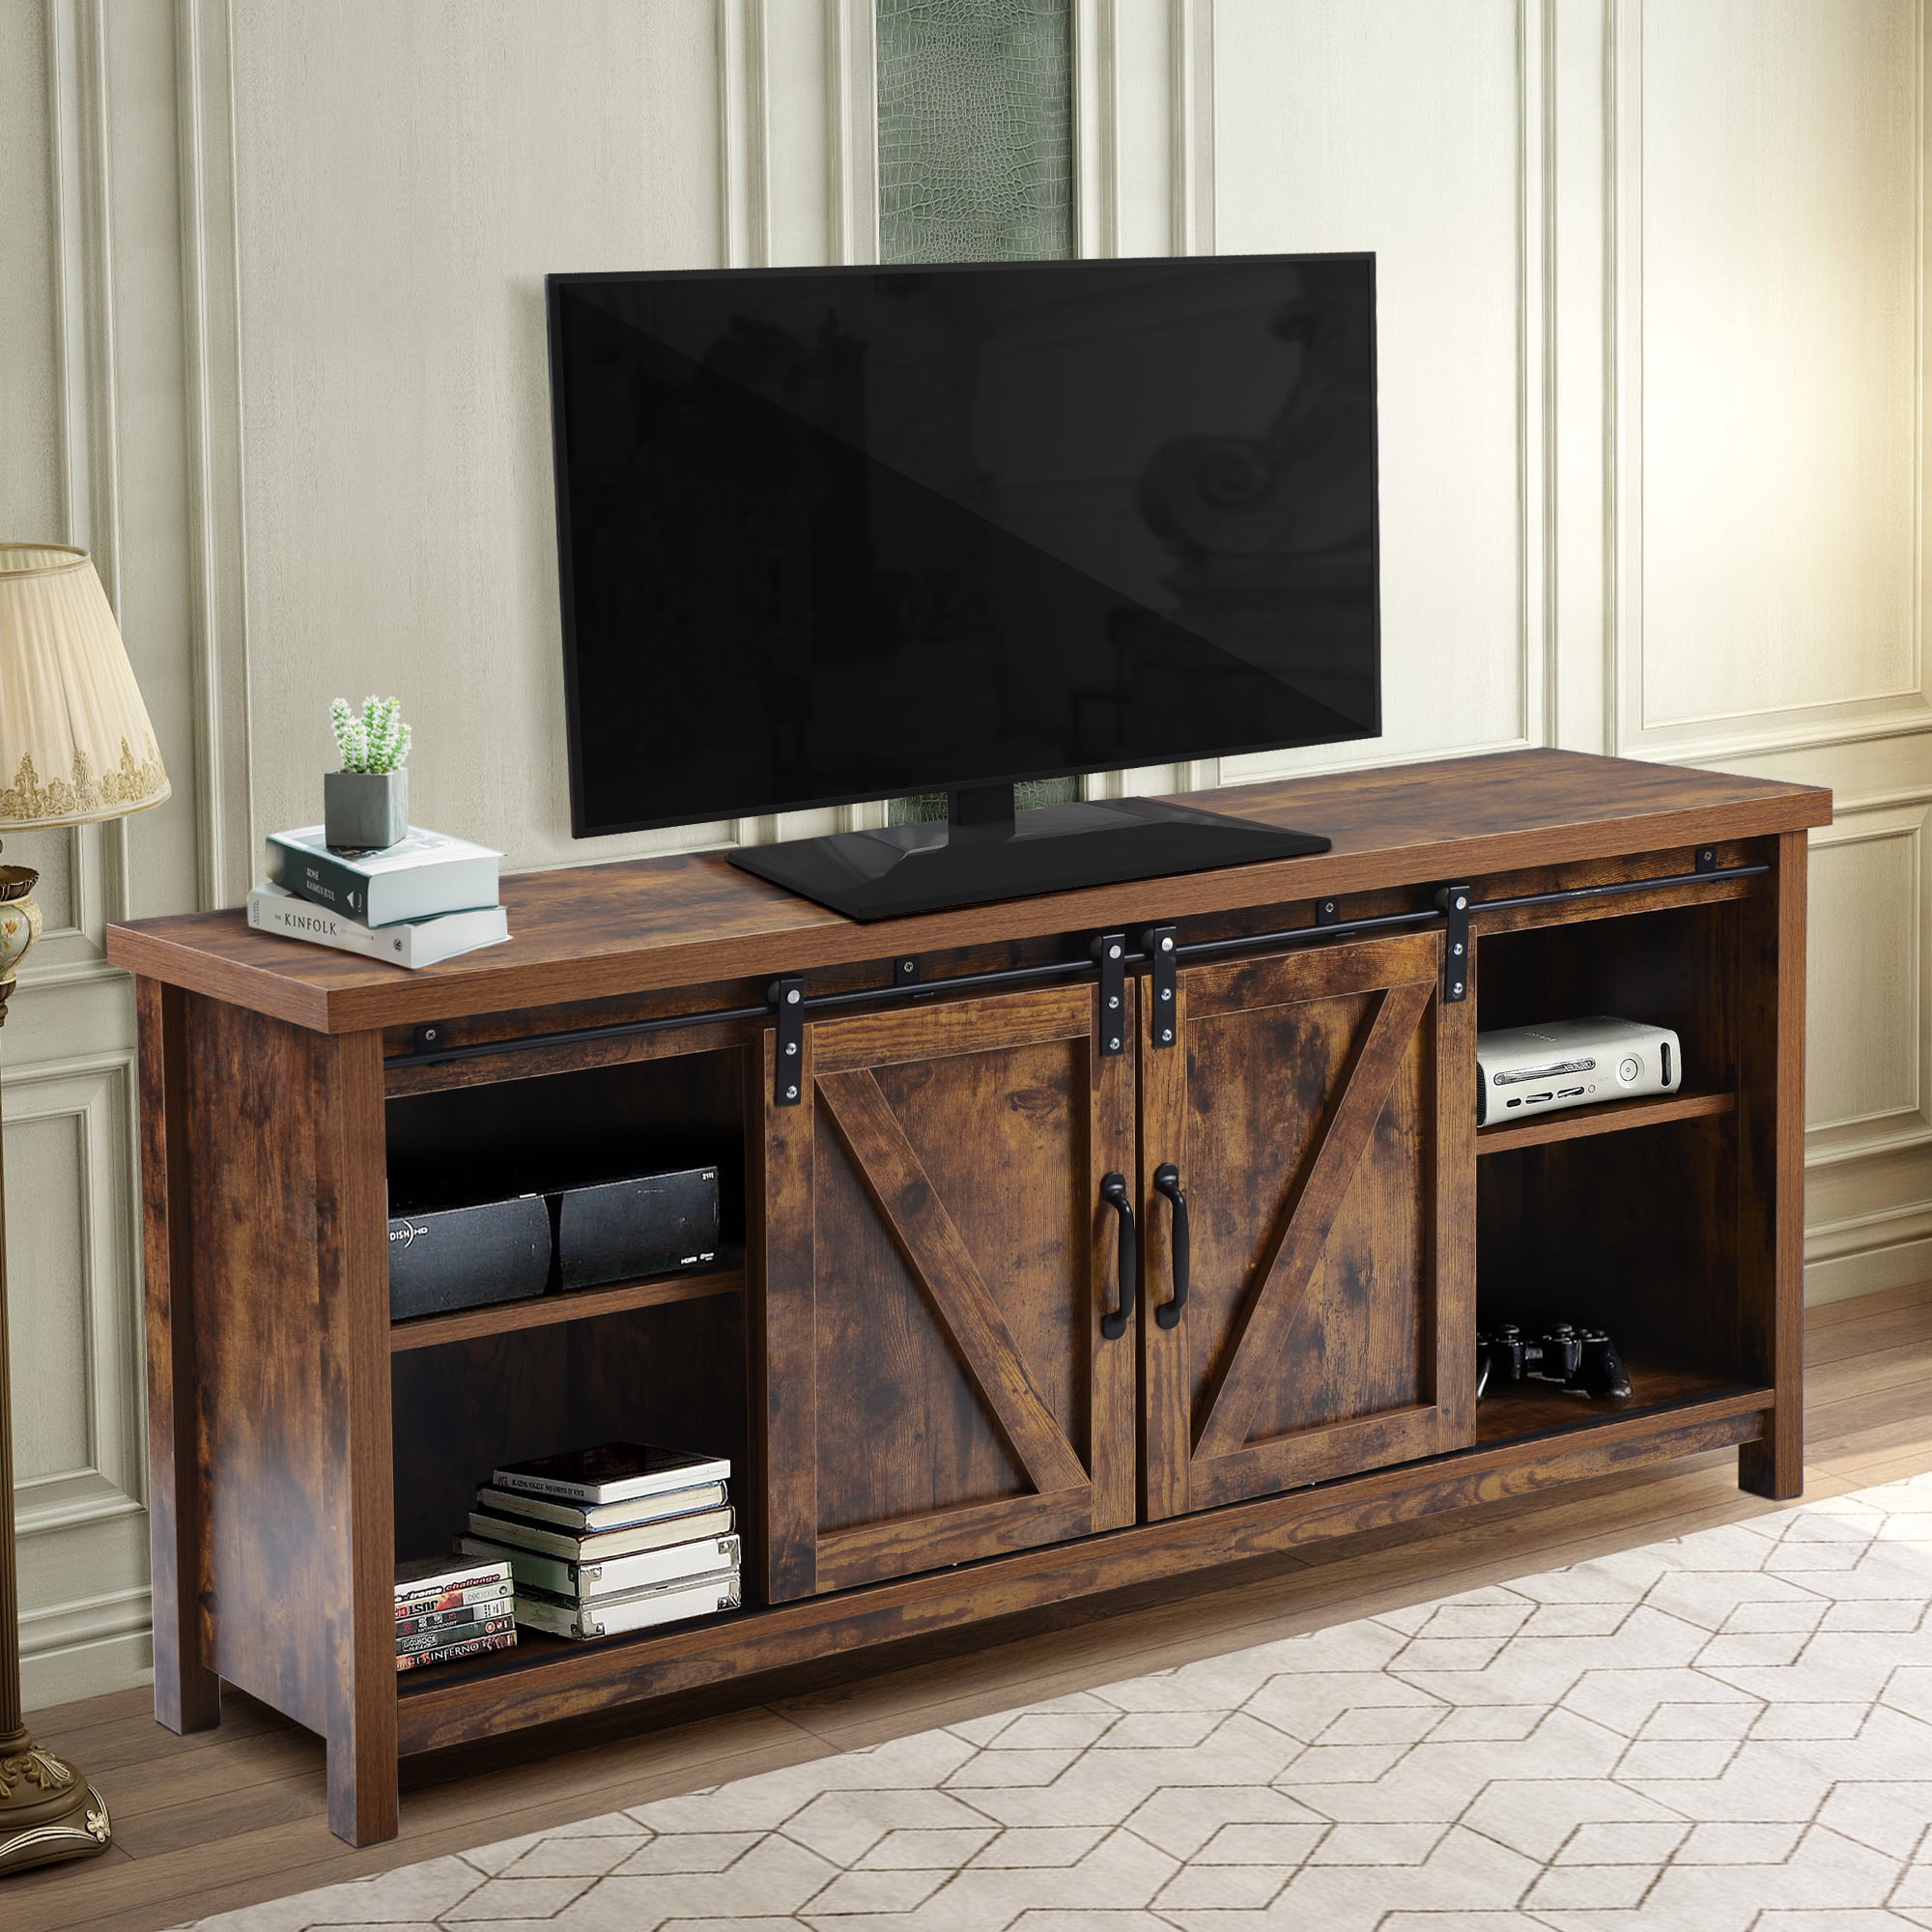 Farmhouse TV Stand Television Entertainment Center Wood Media Console Cabinet